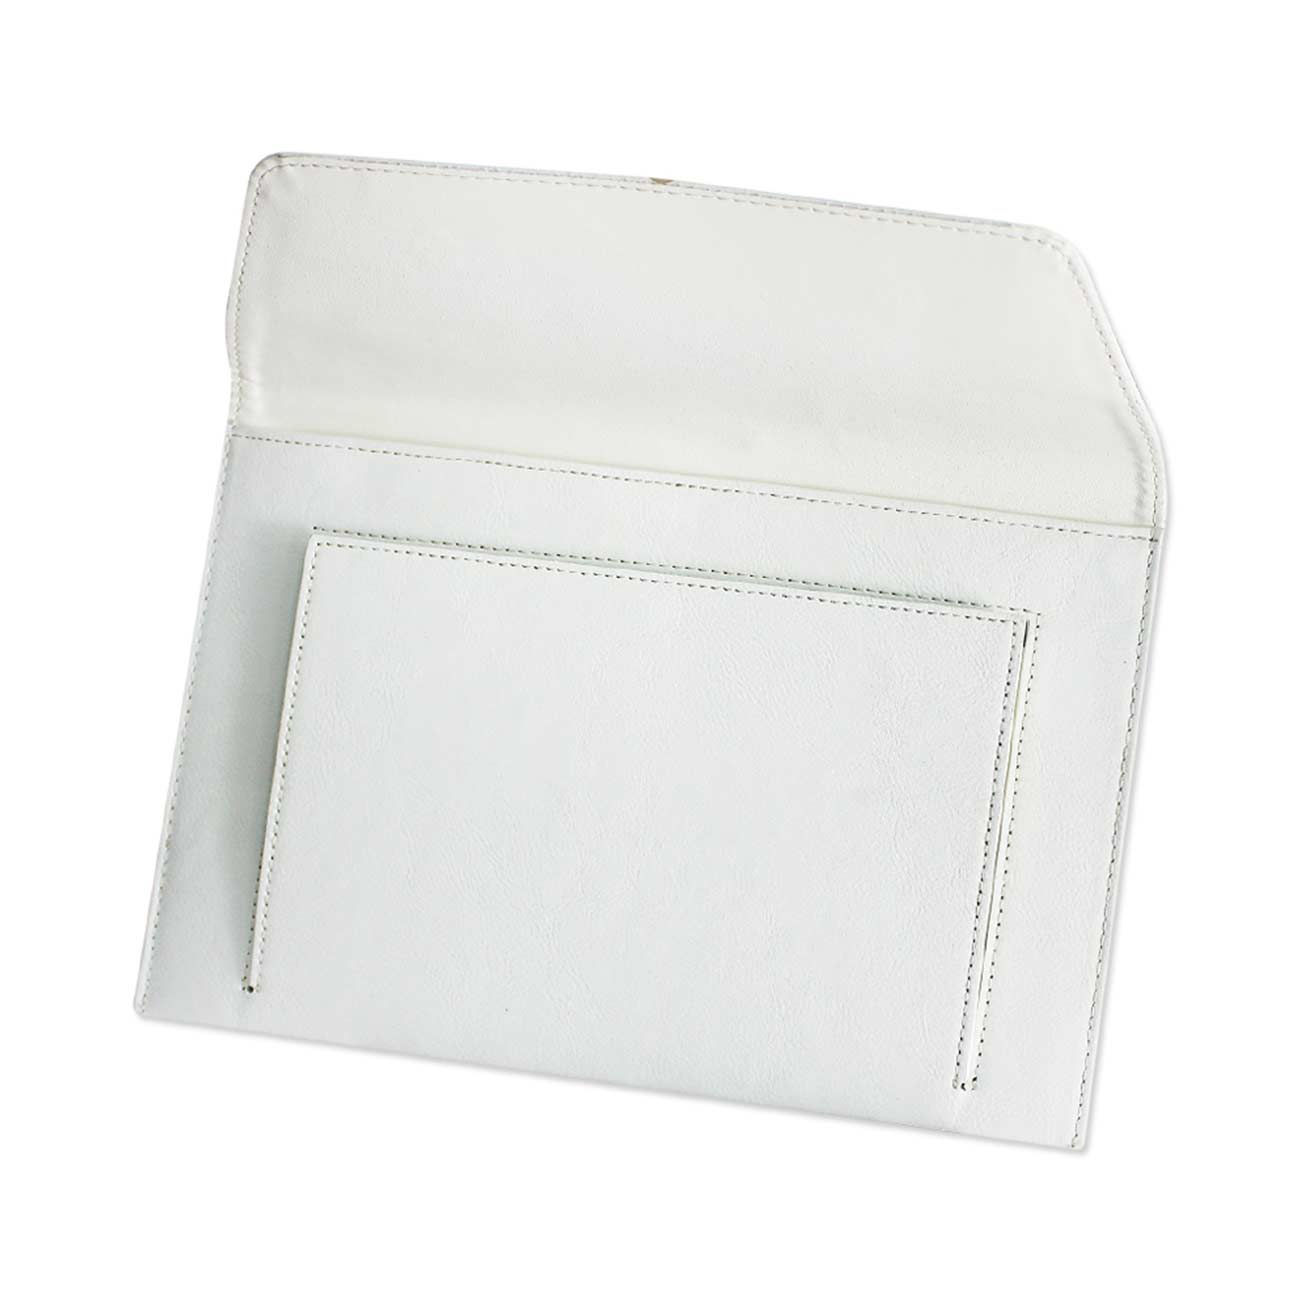 REIKO PREMIUM LEATHER CASE POUCH FOR 7INCHES IPADS AND TABLETS In WHITE